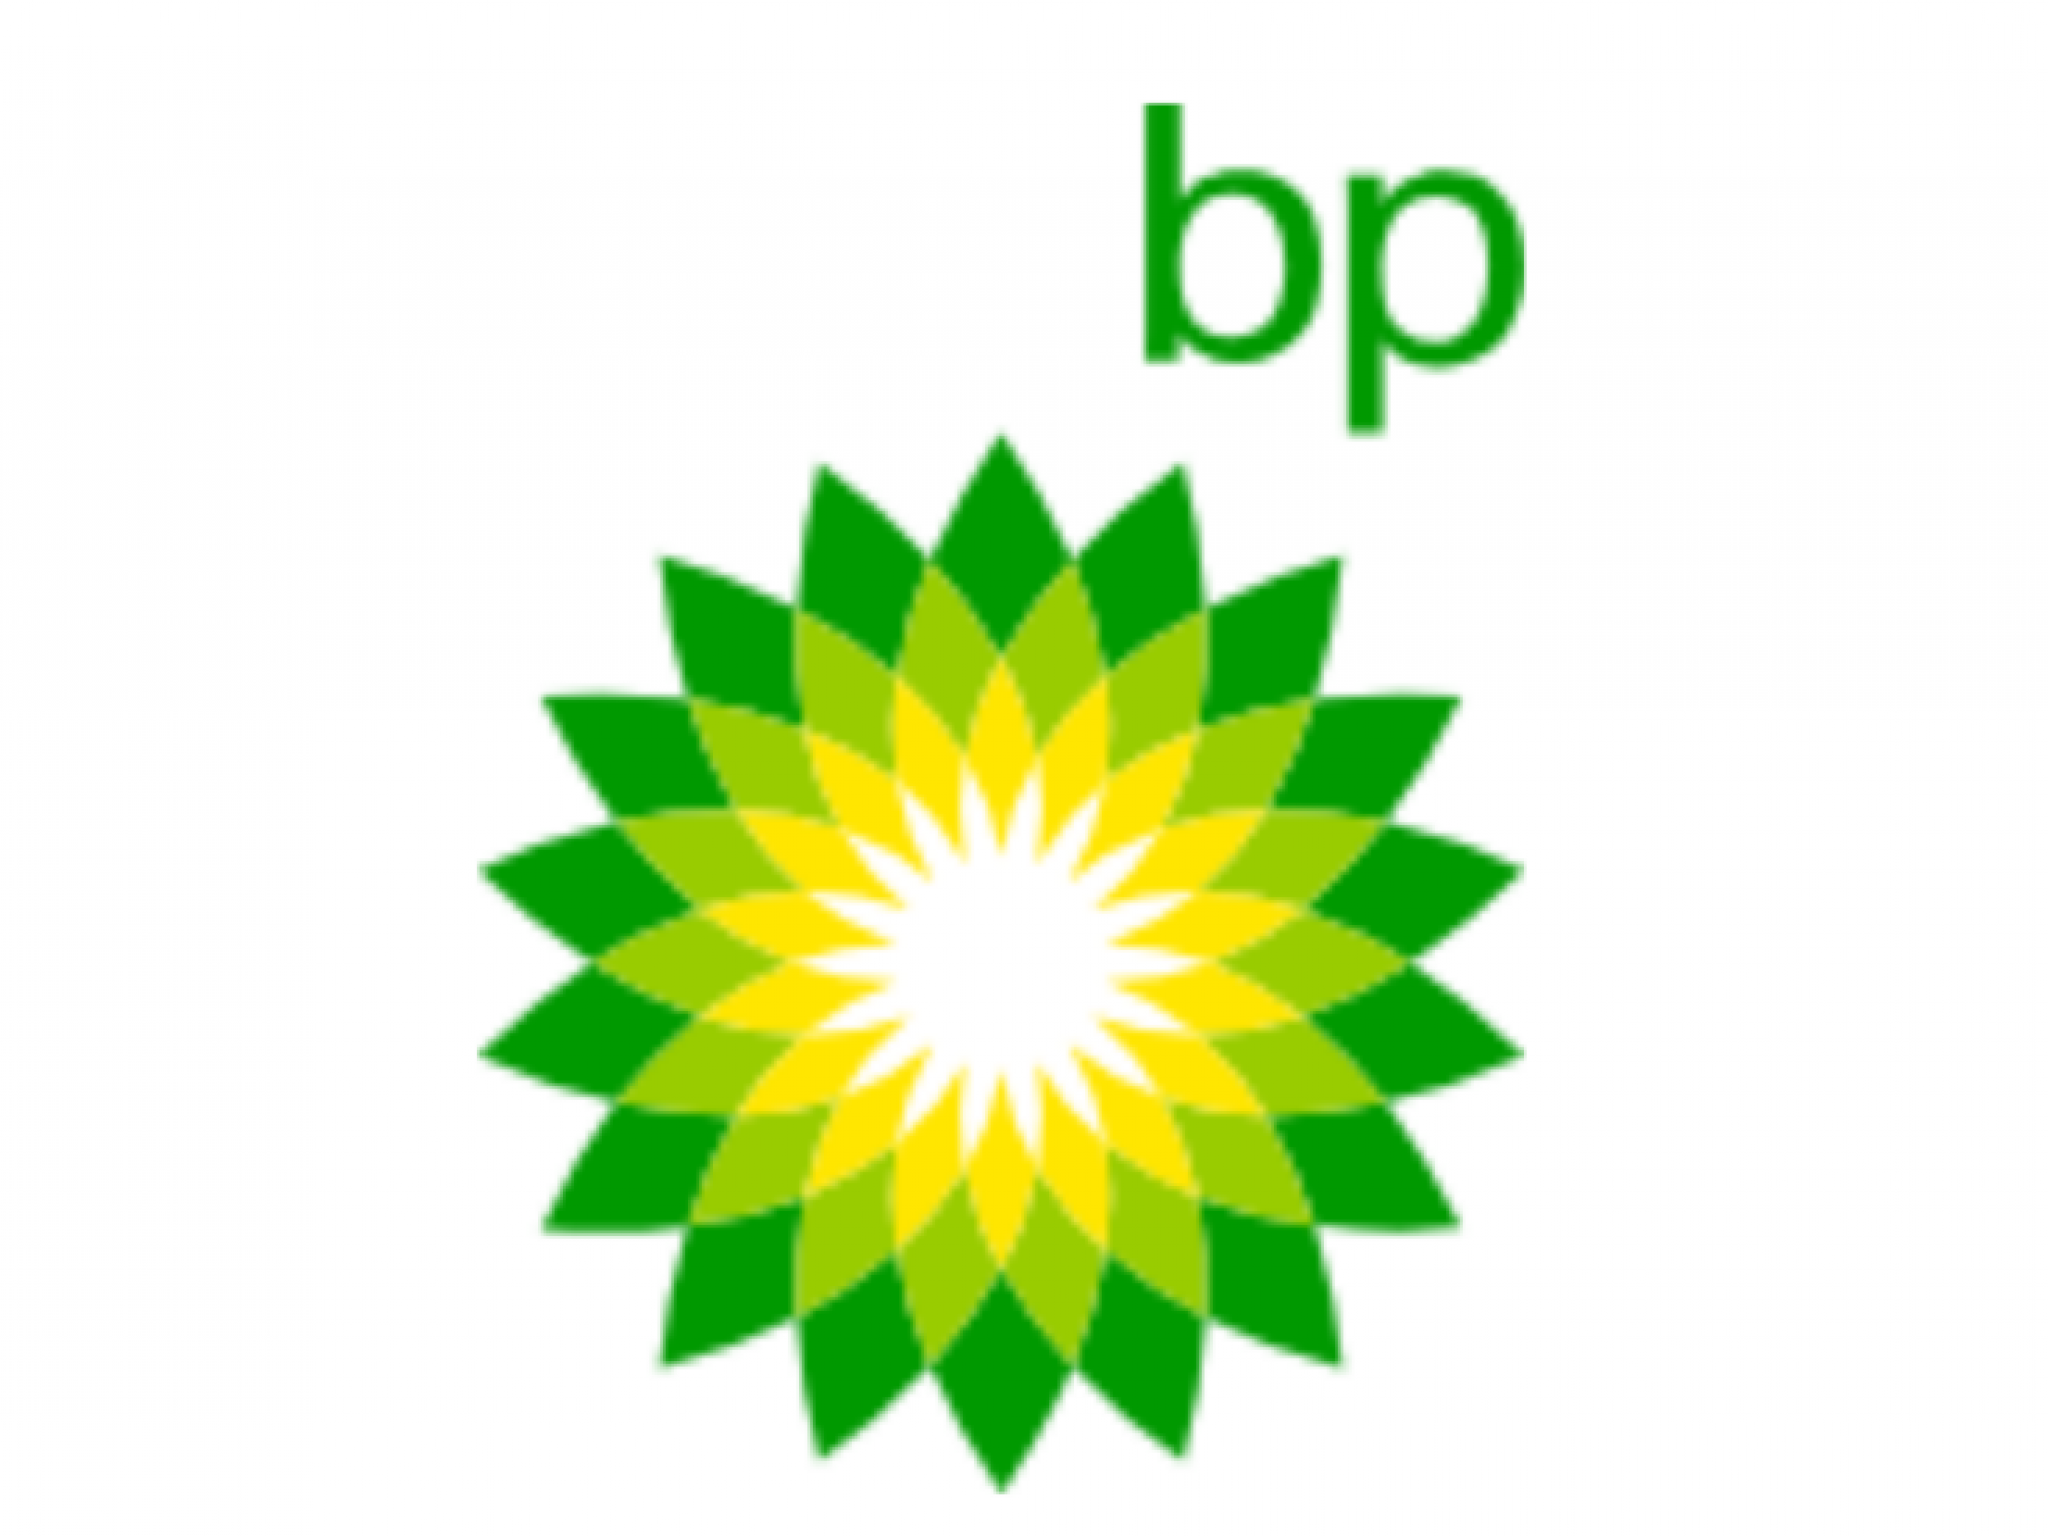  bp-and-adnoc-target-eastern-mediterranean-gas-riches-report 